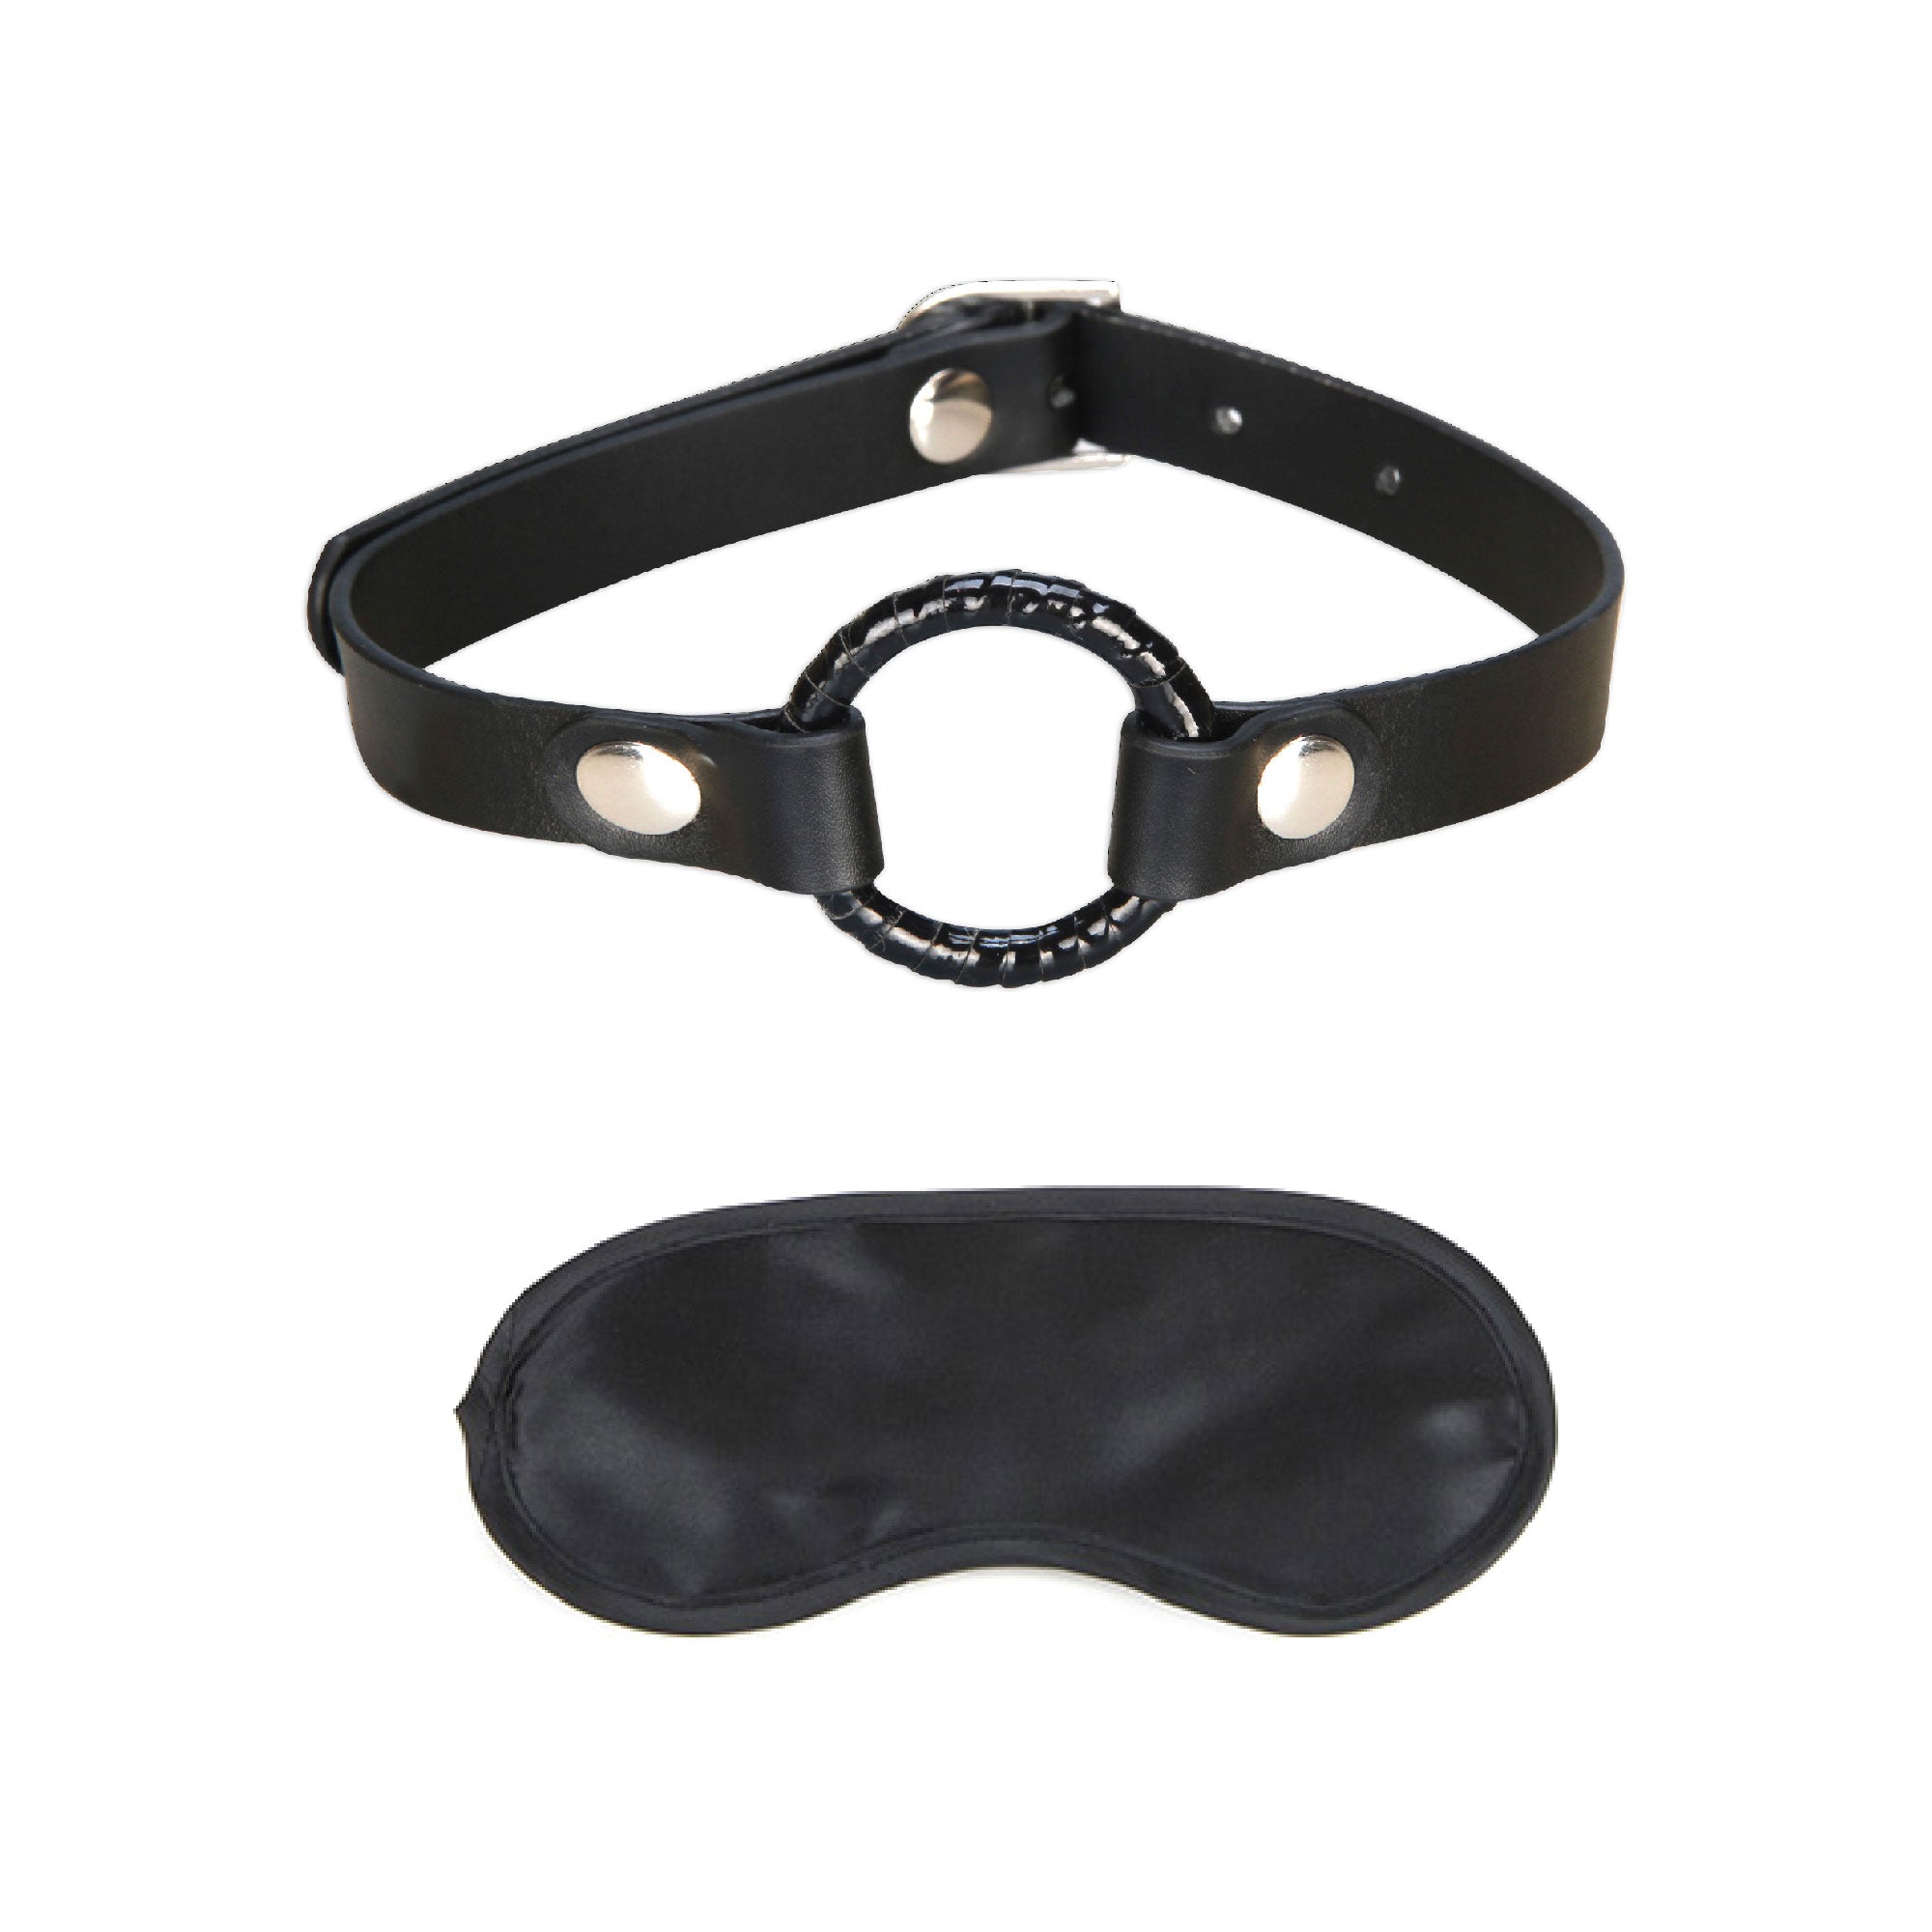 Lux Fetish Open Mouth Ring Gag Ball Gag at glastoy.com